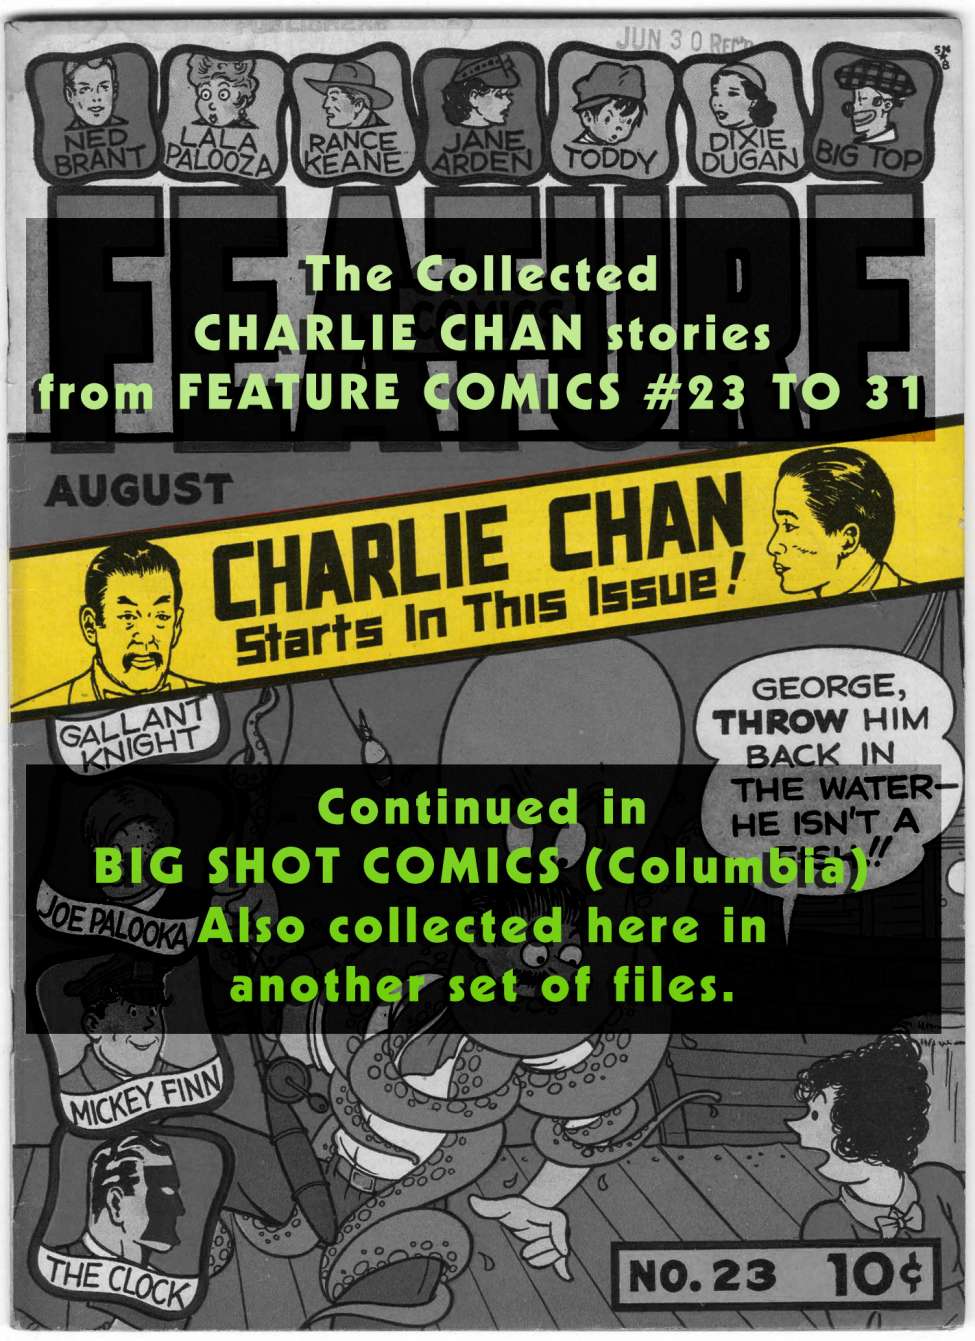 Comic Book Cover For Charlie Chan Stories from Quality's Feature Comics